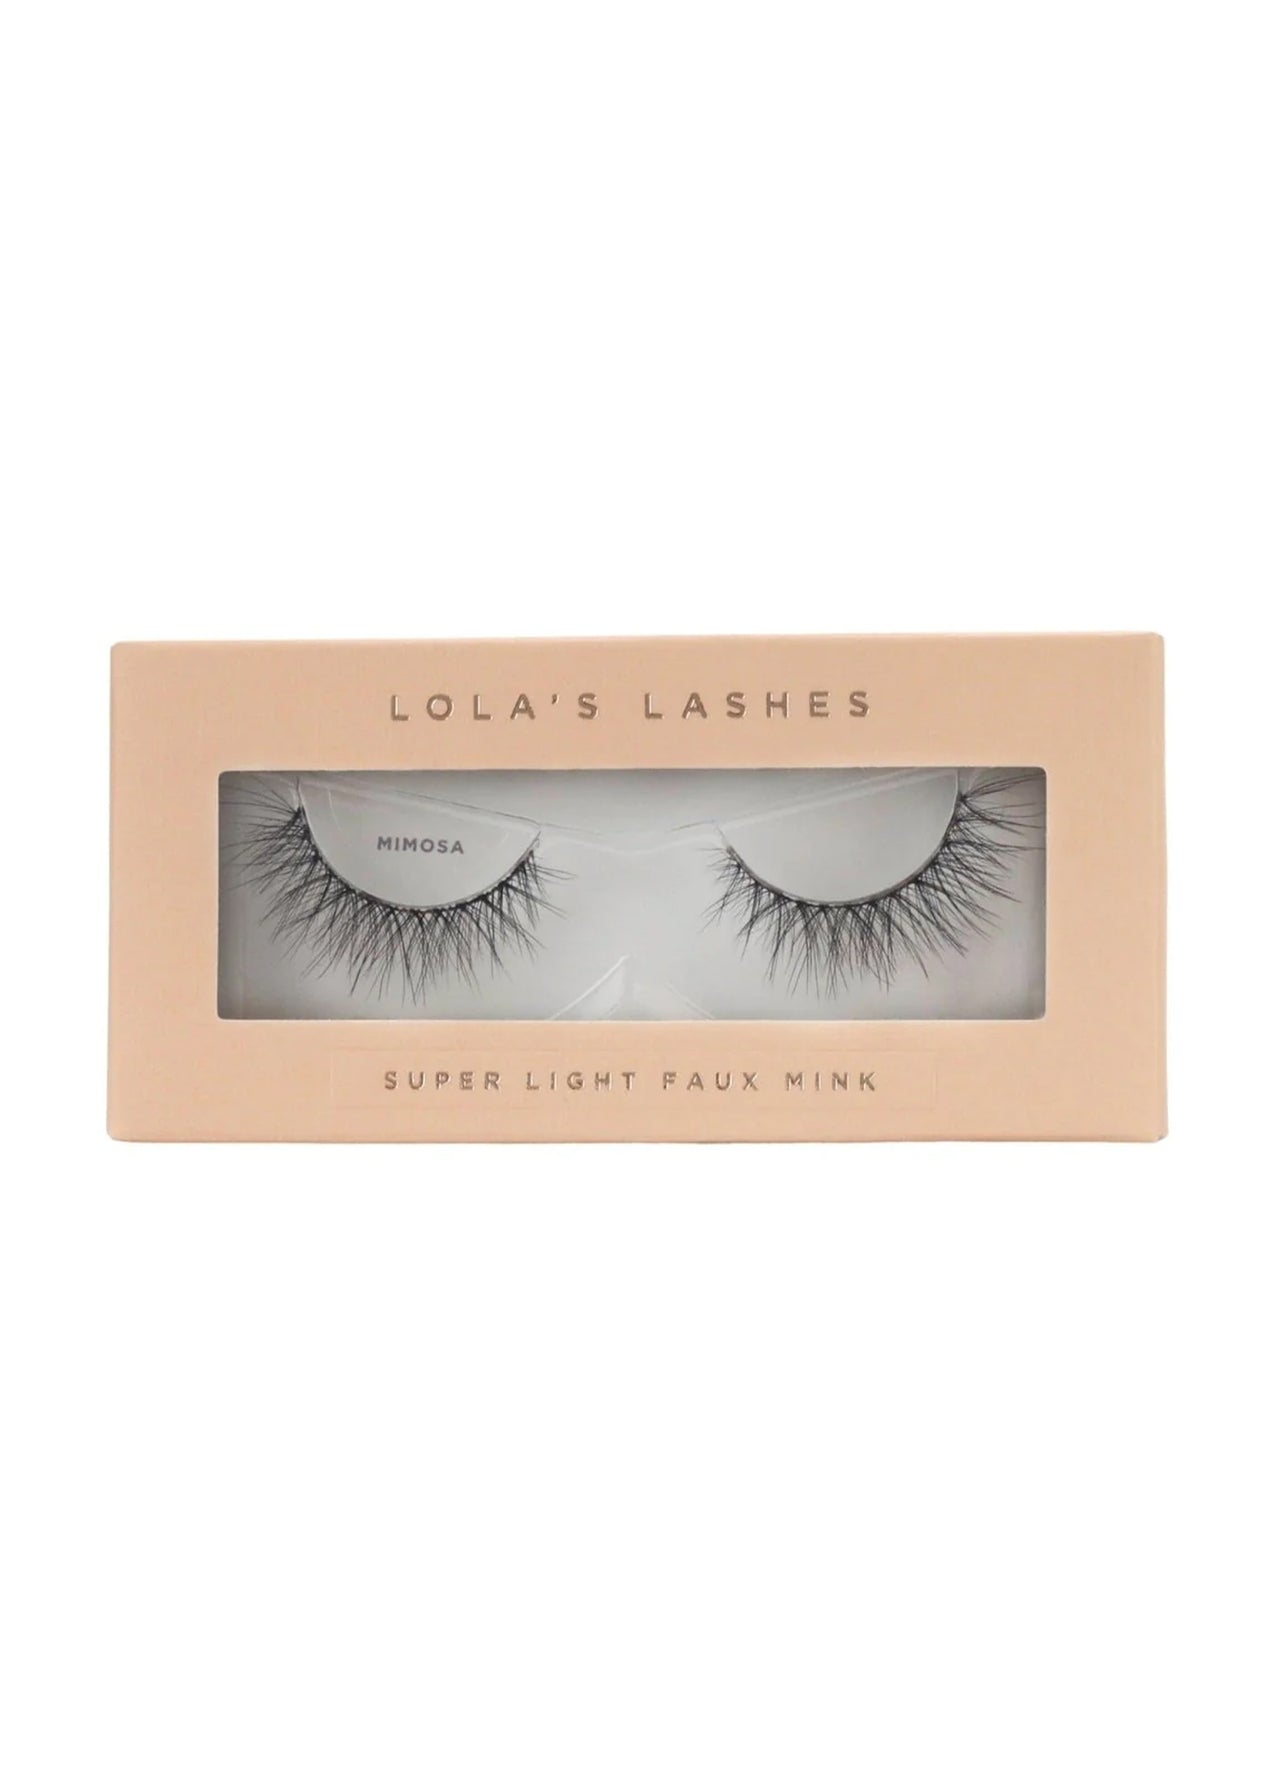 LOLA'S LASHES Mimosa Faux Mink Clear Band Strip Lashes